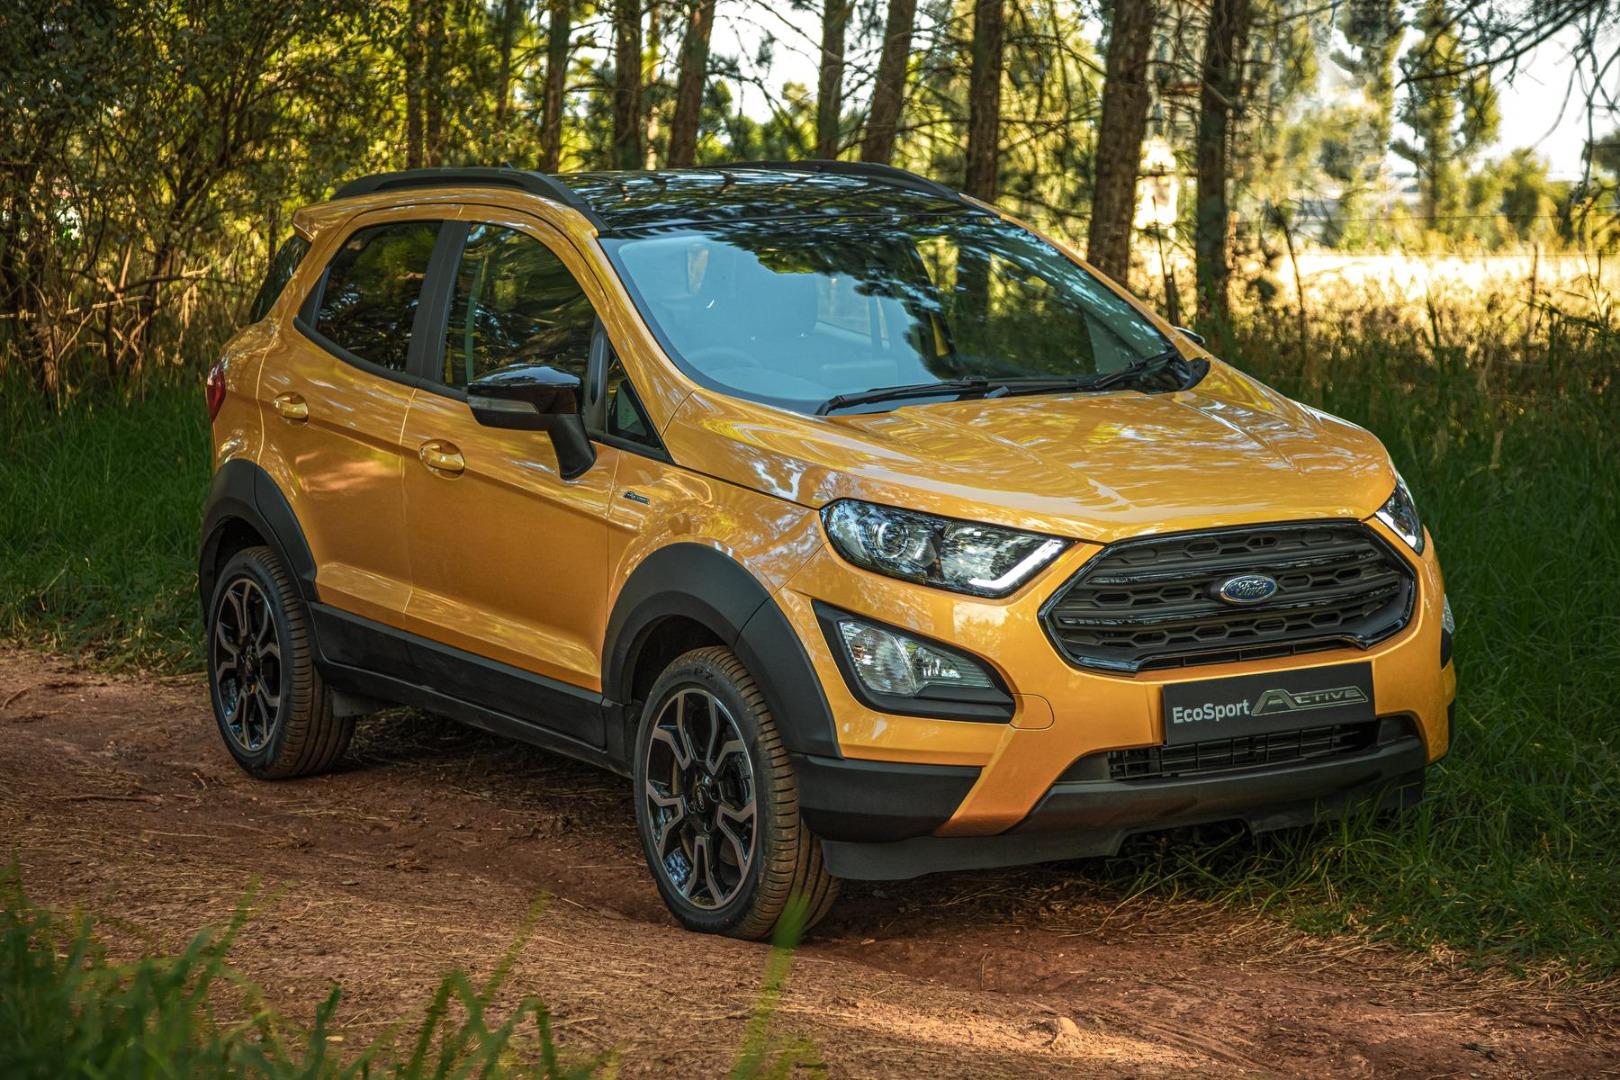 does the ford ecosport active have a sunroof?